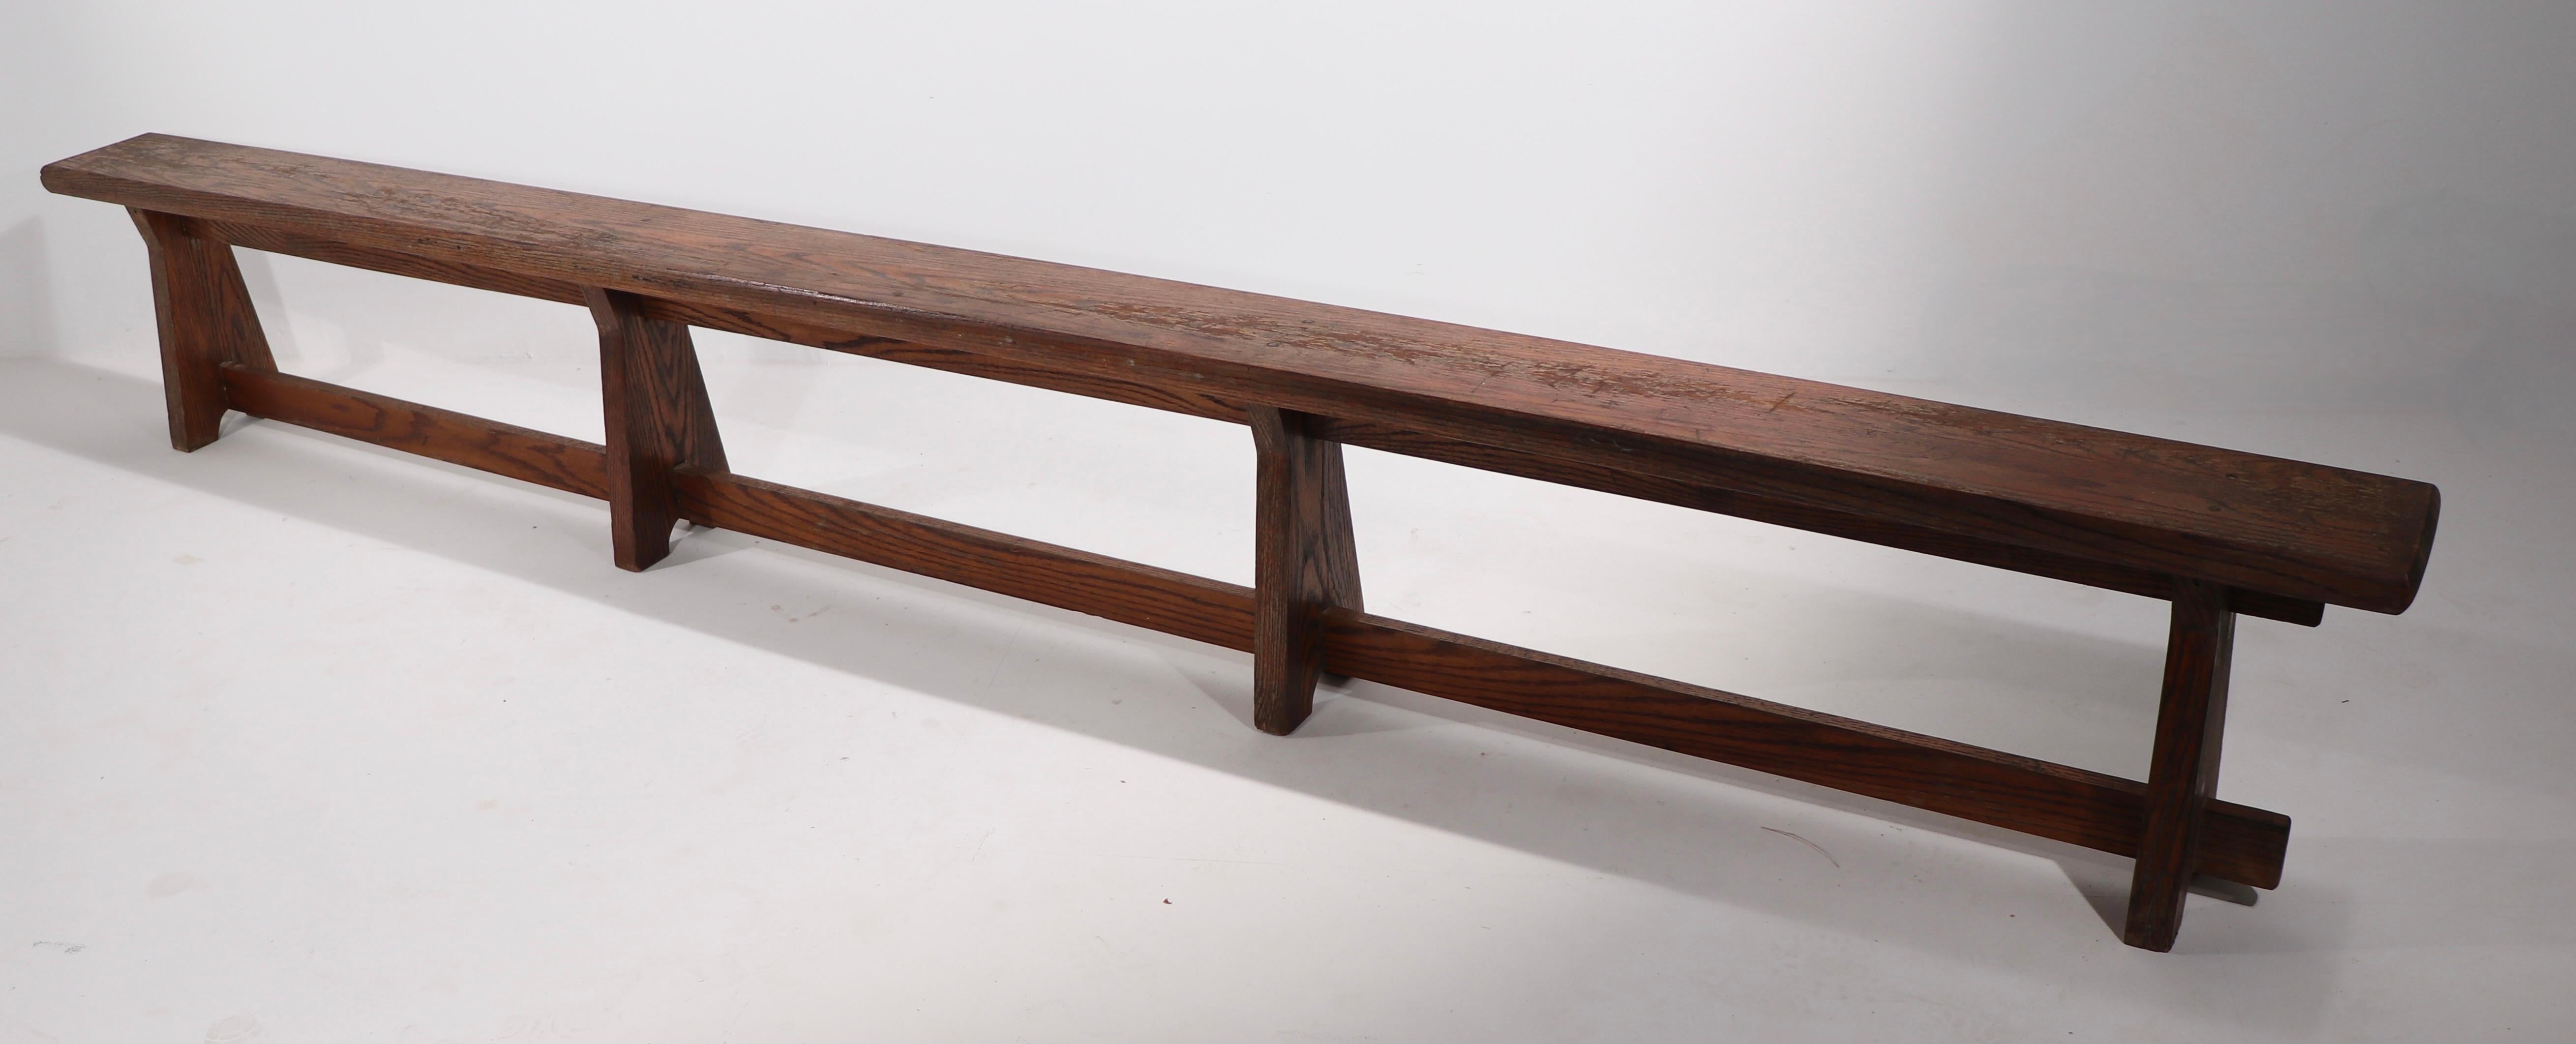 Oak Rustic Adirondack Arts and Crafts Style Benches